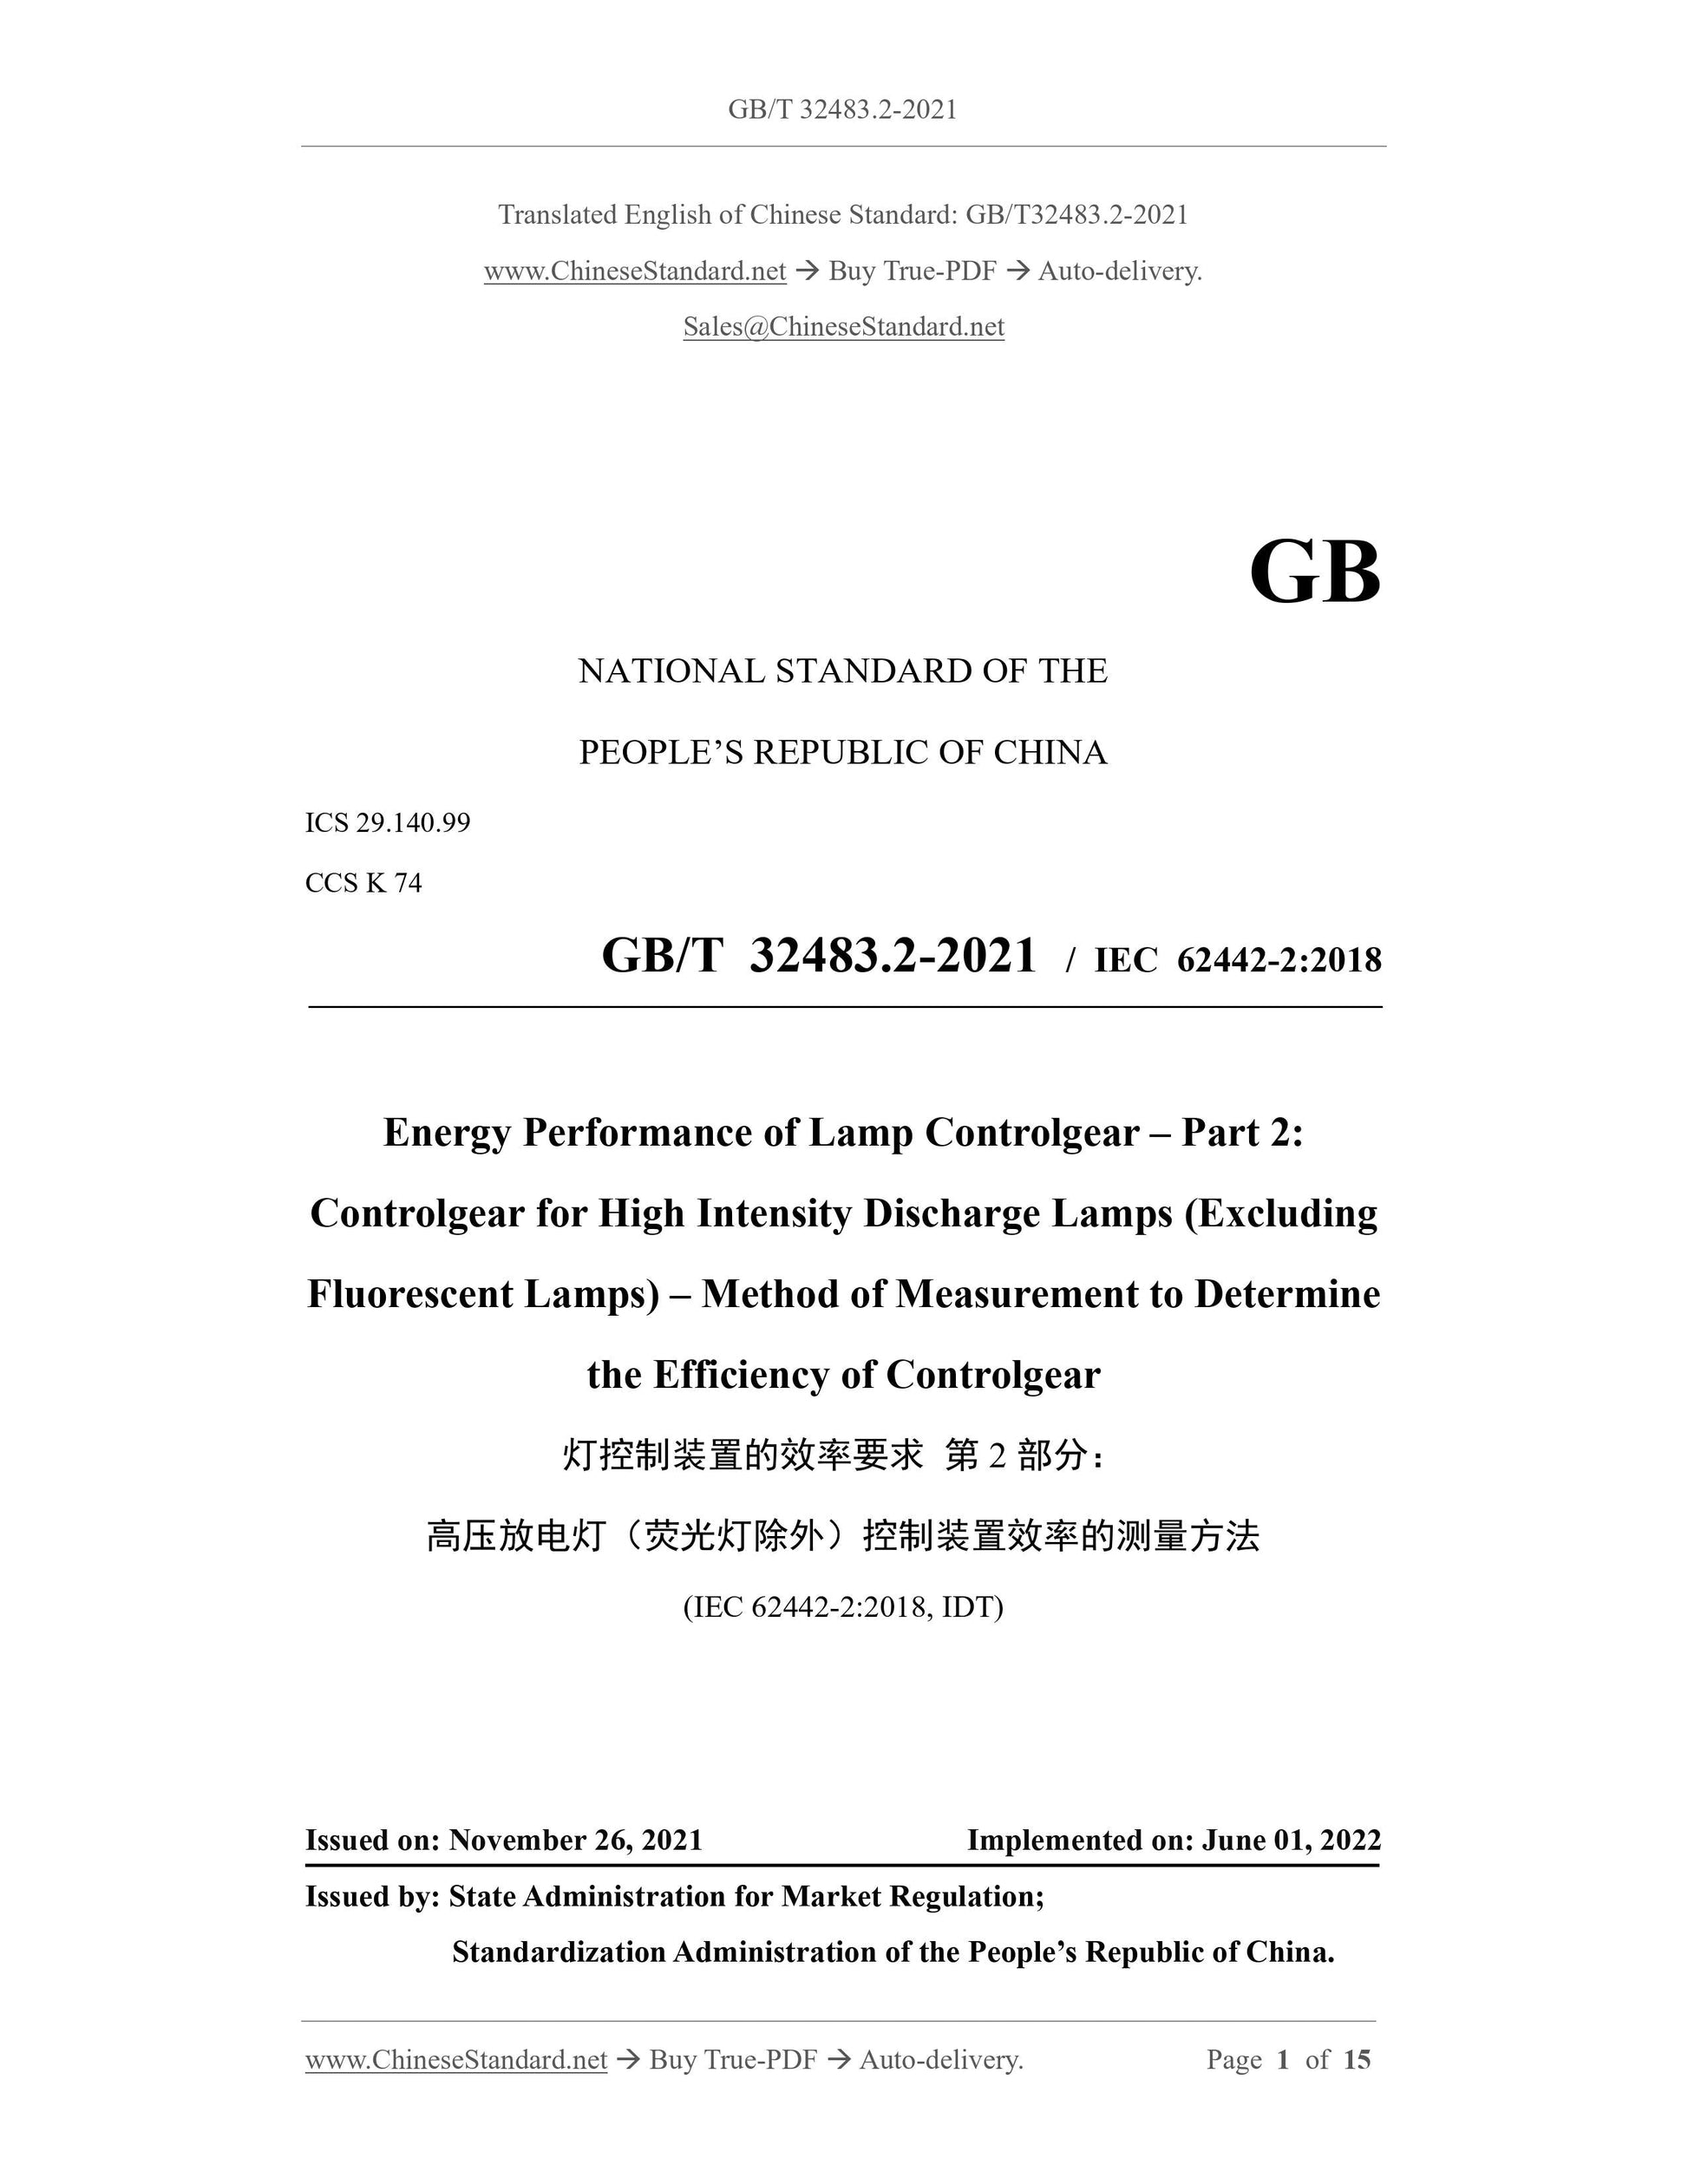 GB/T 32483.2-2021 Page 1